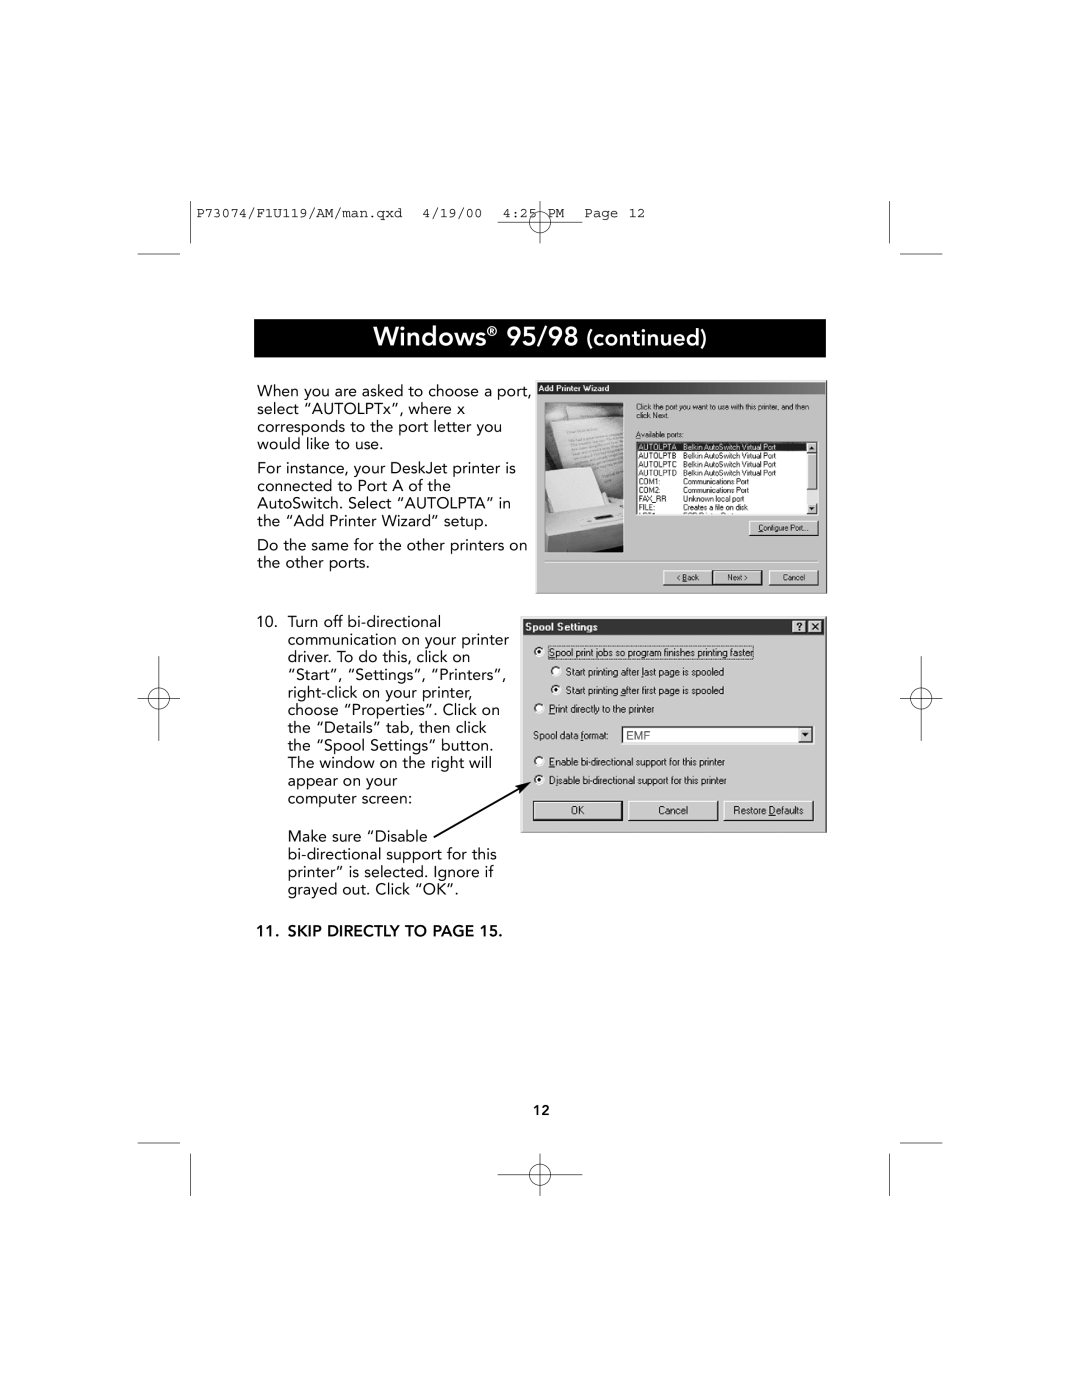 Belkin F1U119 user manual Windows 95/98 continued, Do the same for the other printers on the other ports 